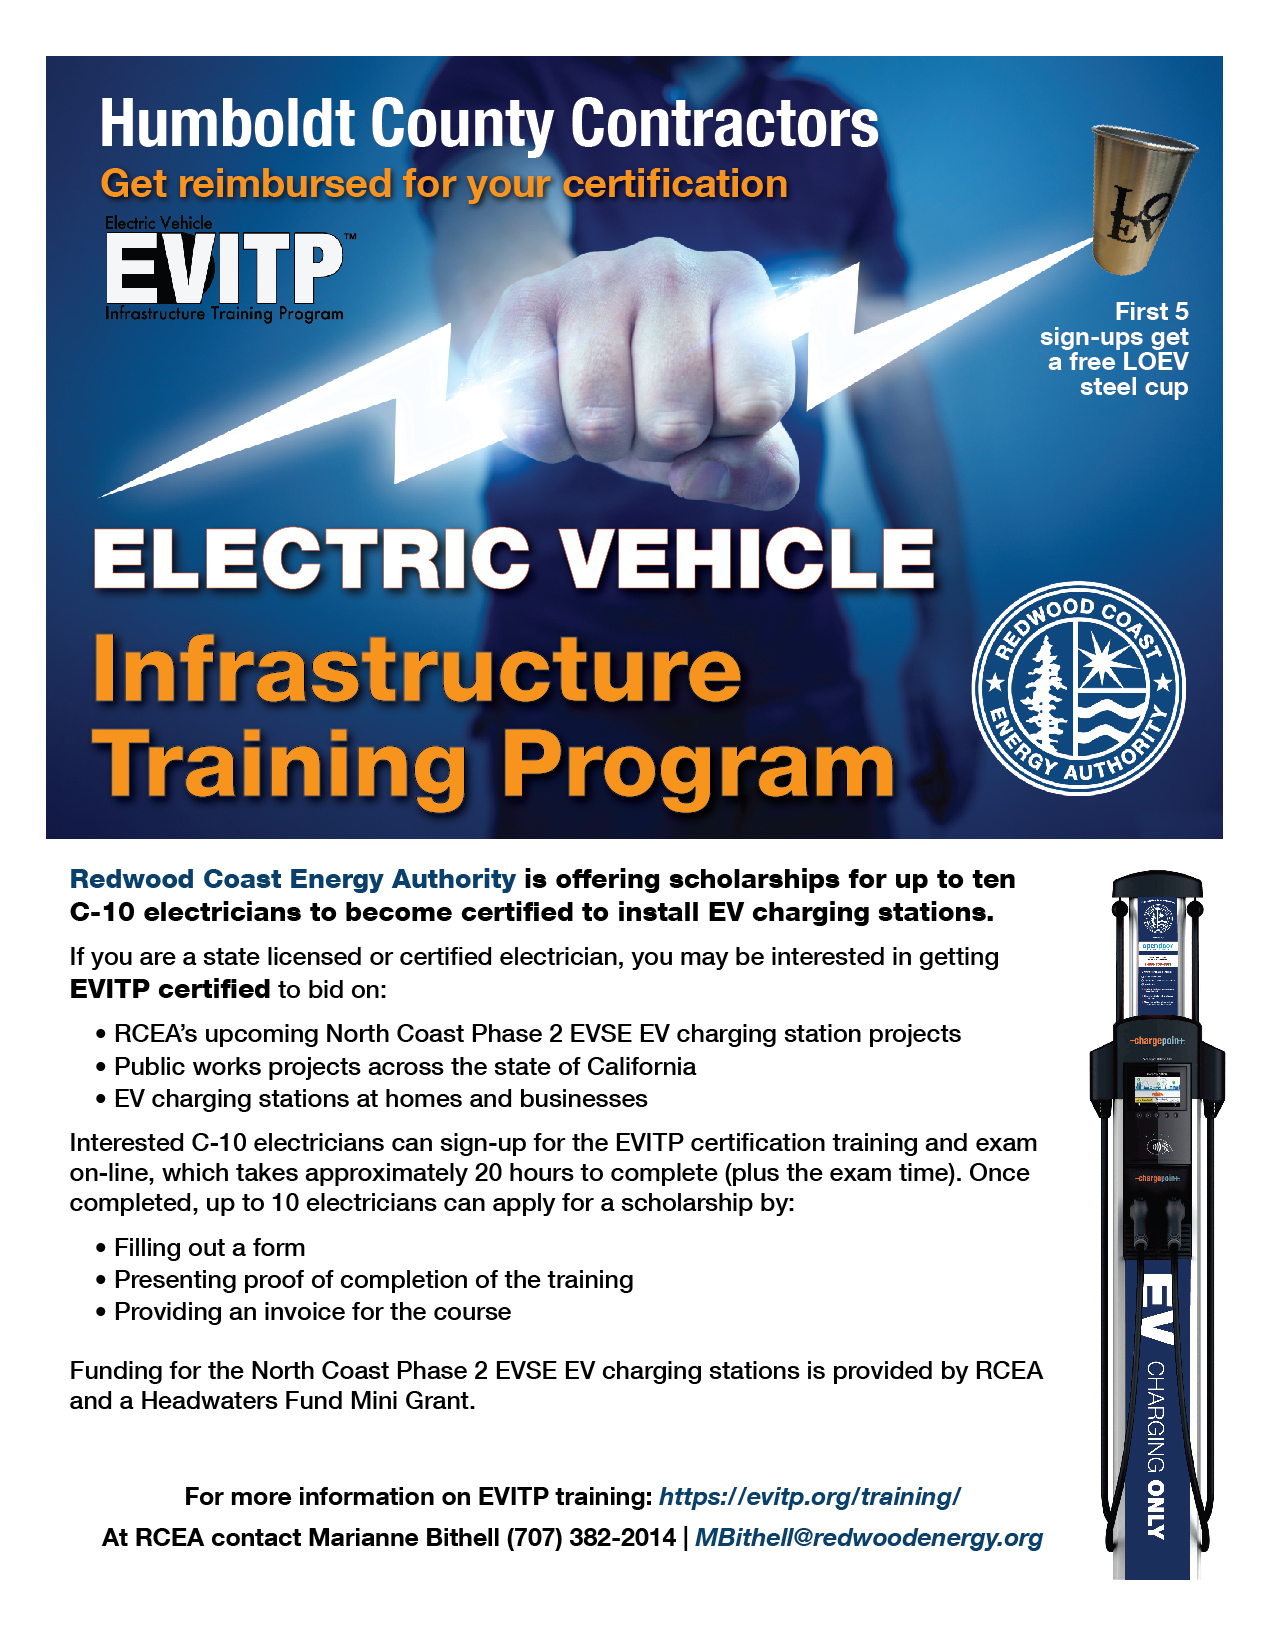 Flyer describing how to apply for a EVIPT scholarship. Shows a hand holding an electric bolt, with an RCEA charging station on the side